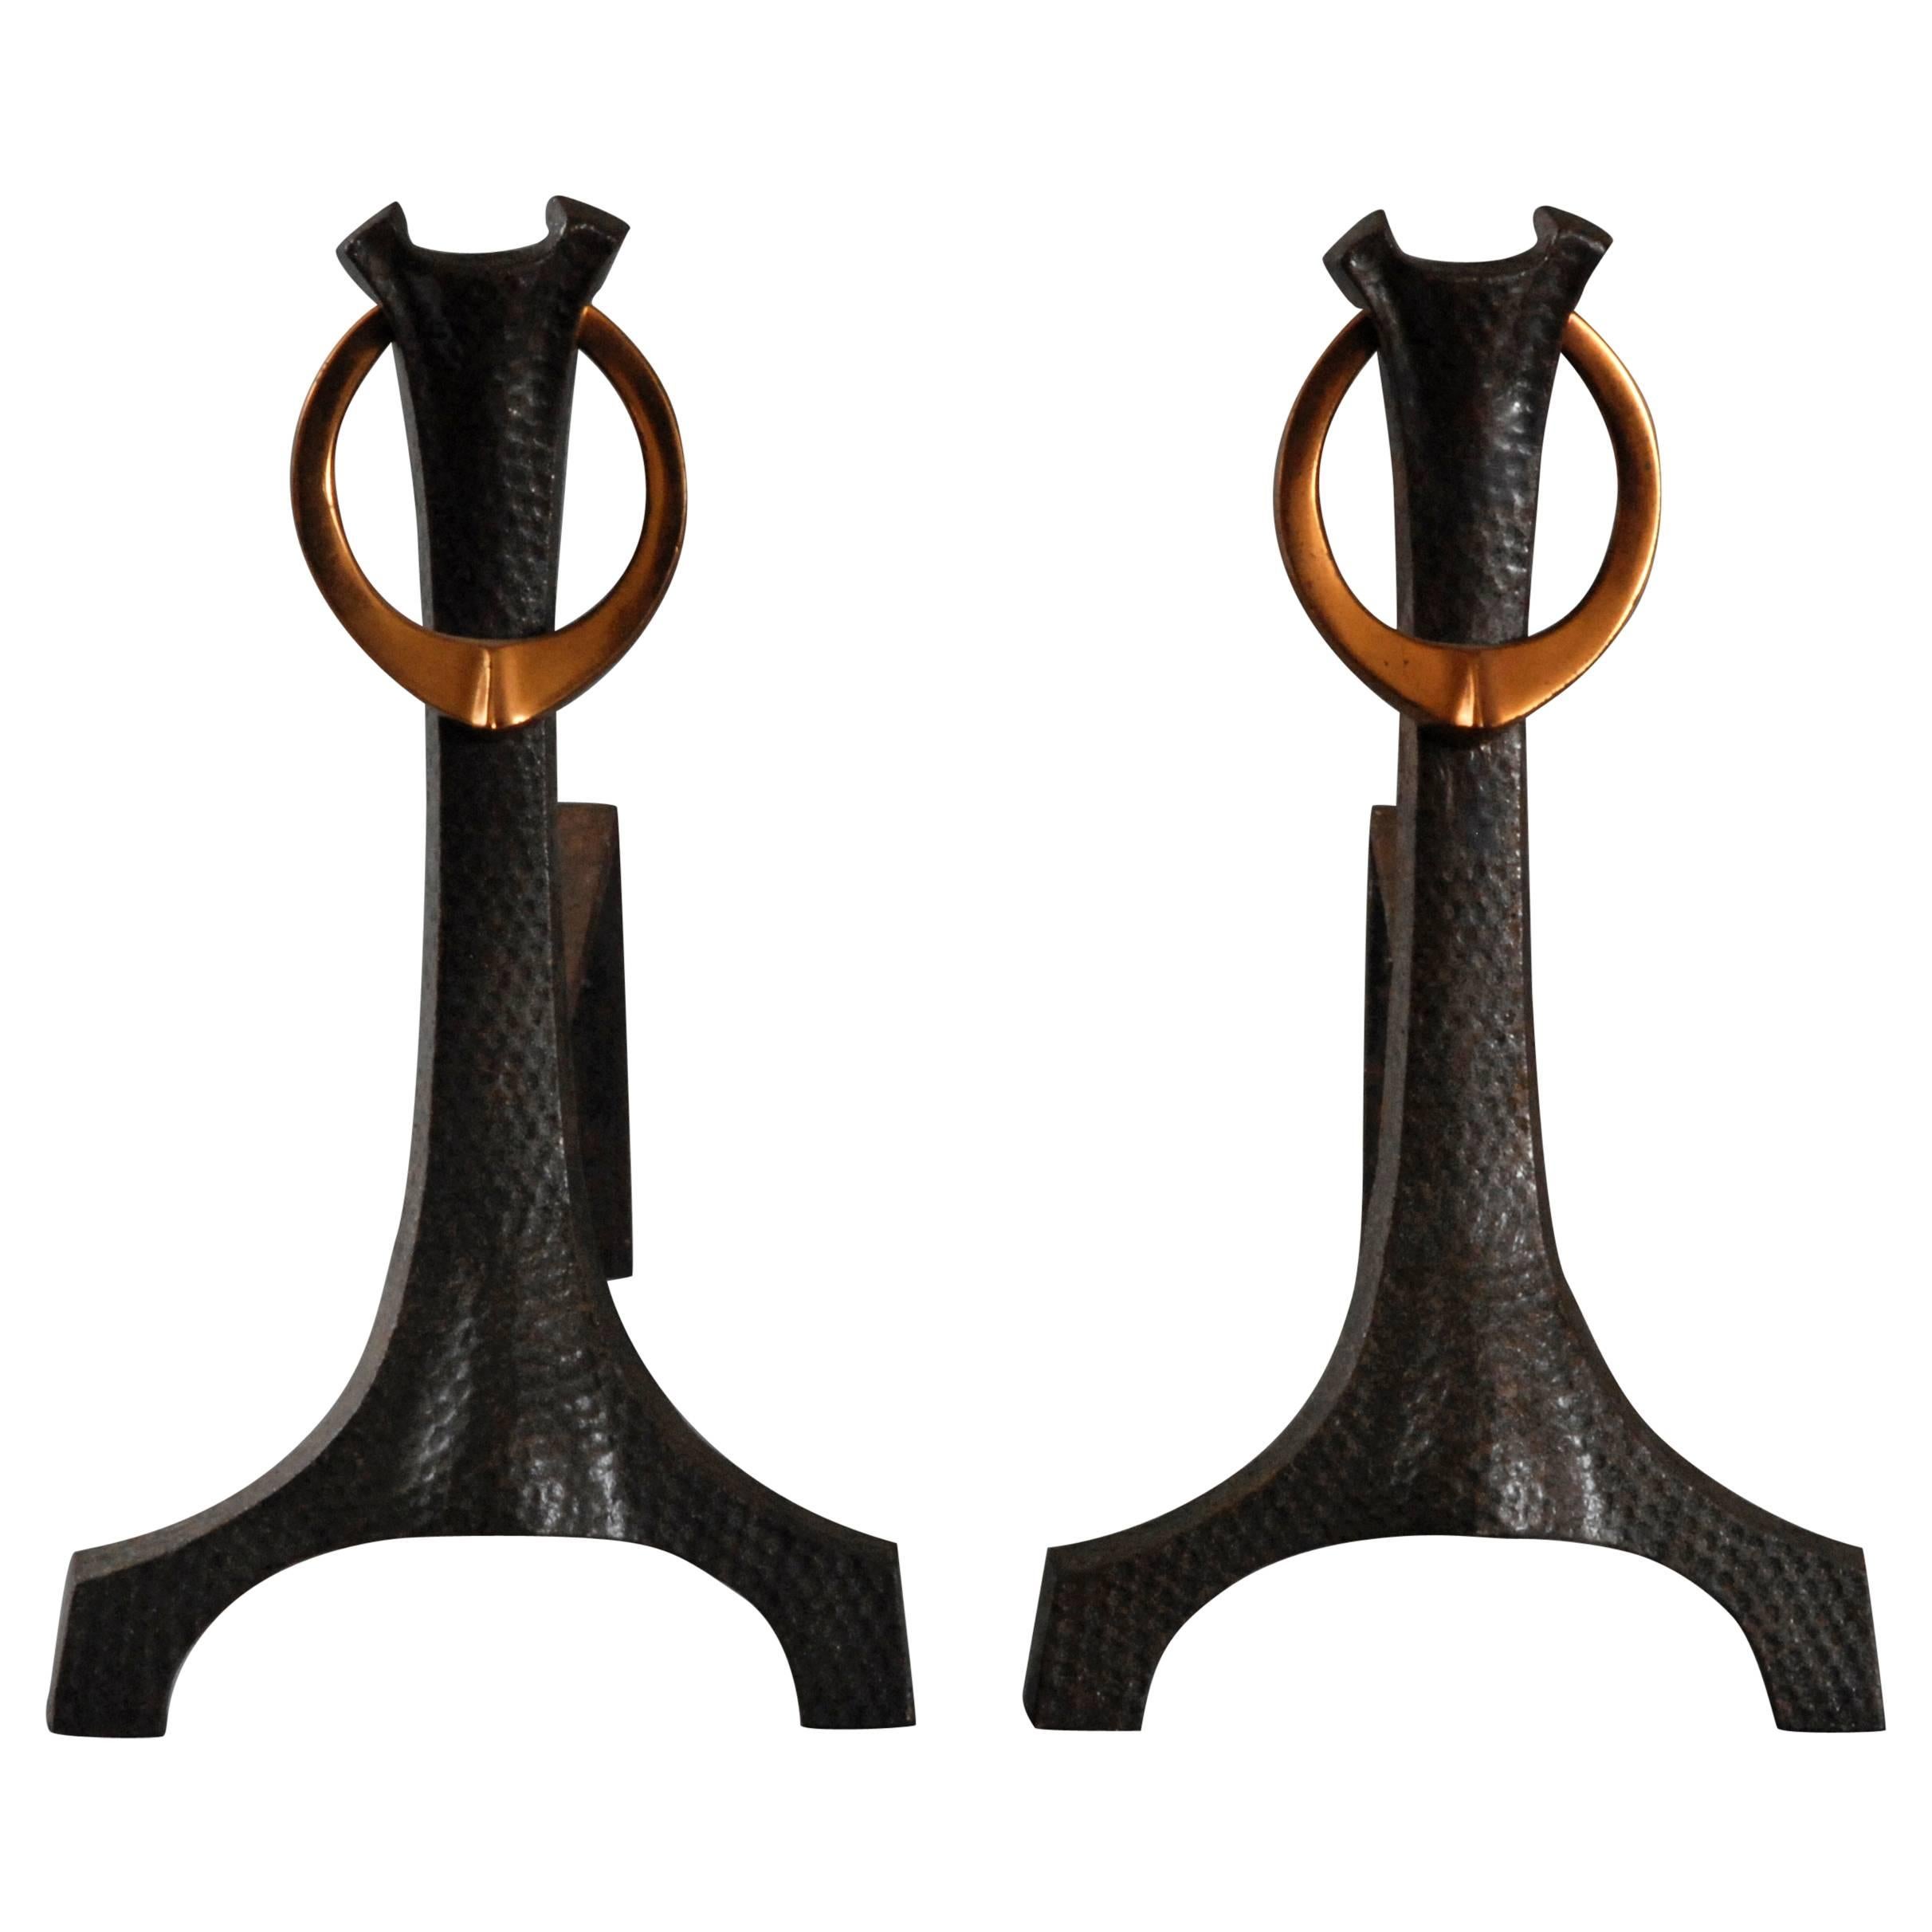 Pair of Andirons or Firedogs, Copper and Iron, English, circa 1905